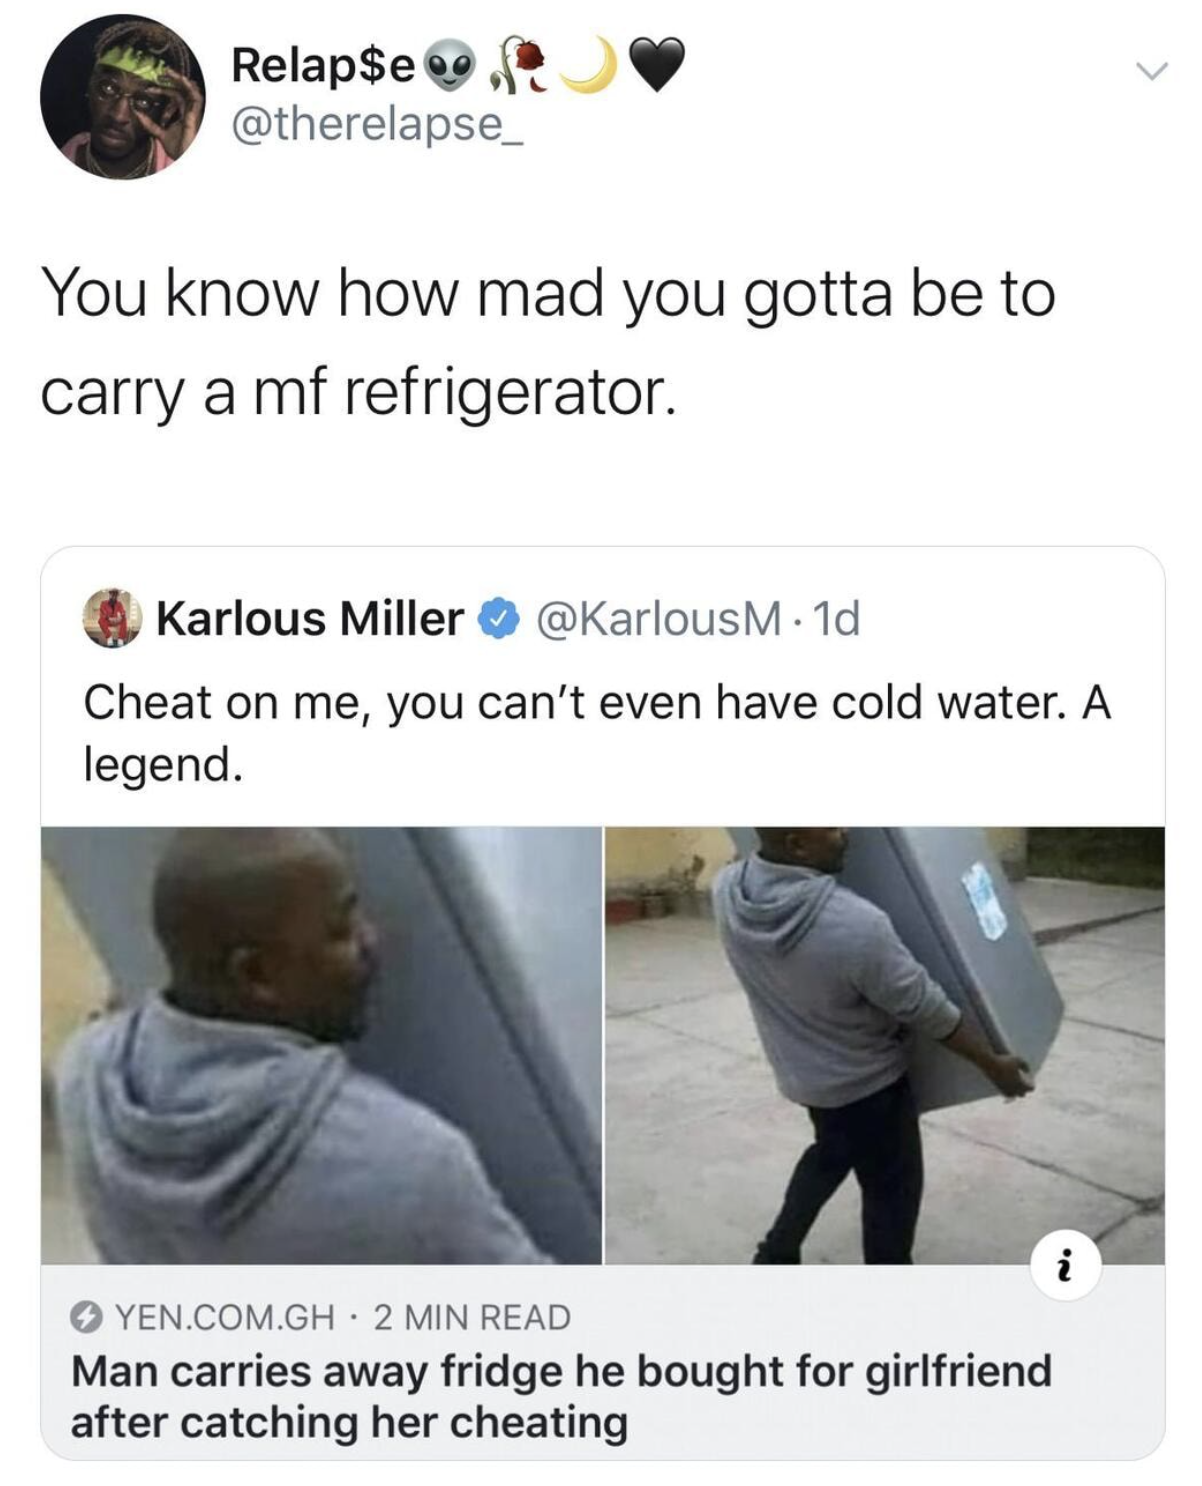 A tweet about a man carrying out a fridge from a cheating girlfriend